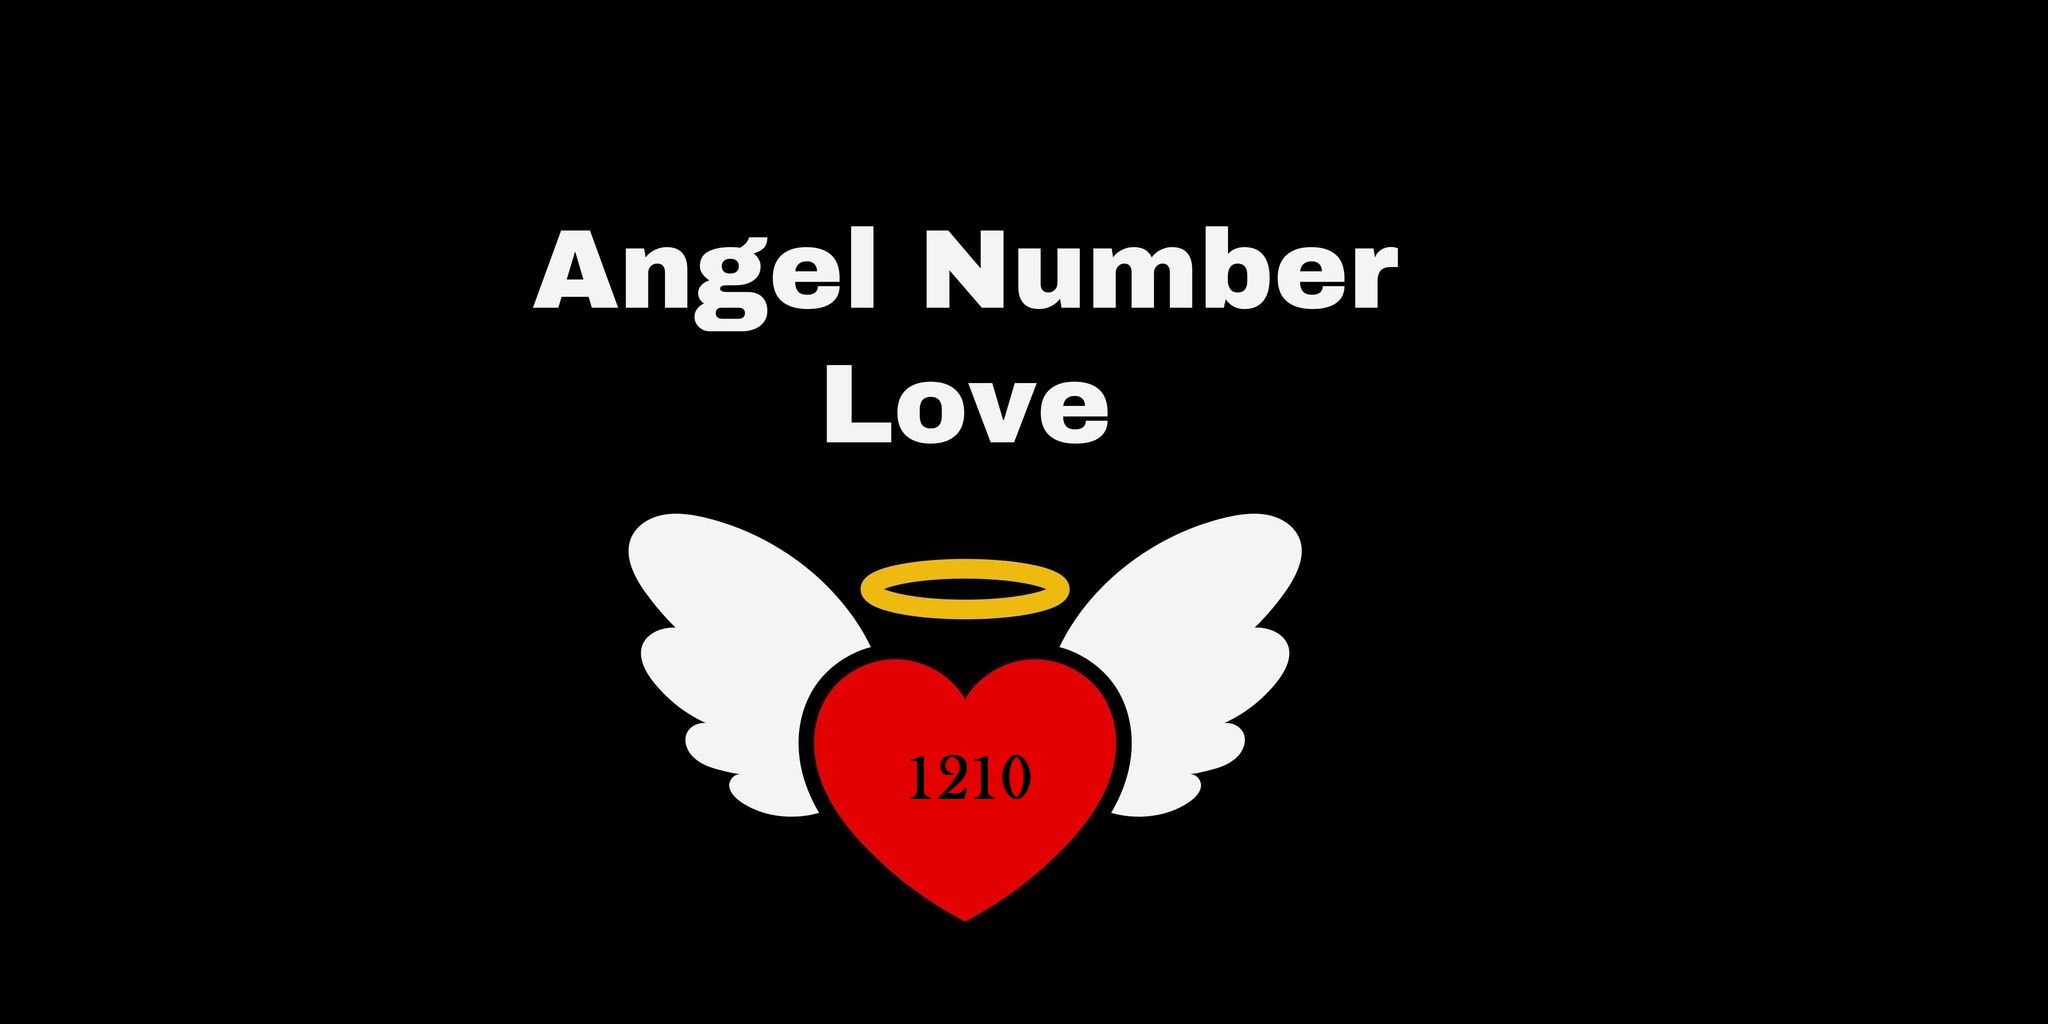 1210 Angel Number Meaning In Love